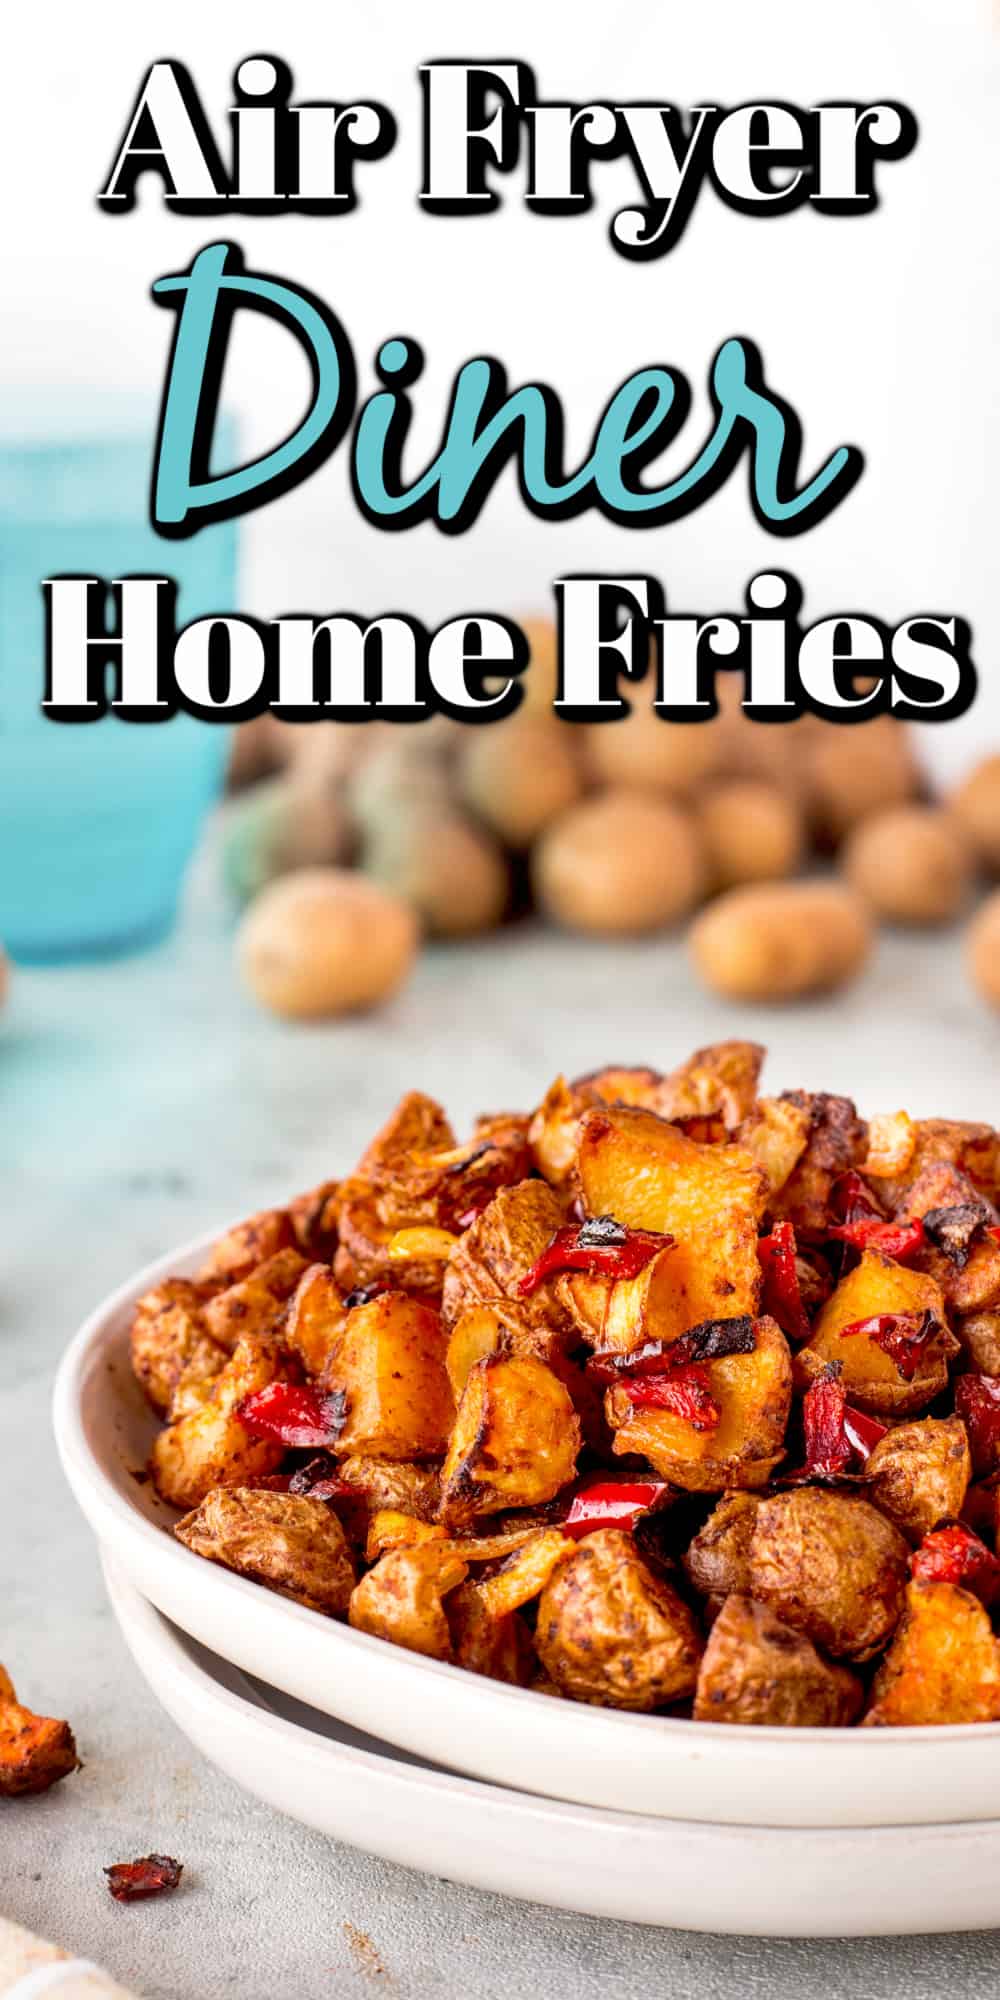 Air Fryer Diner Home Fries Pin